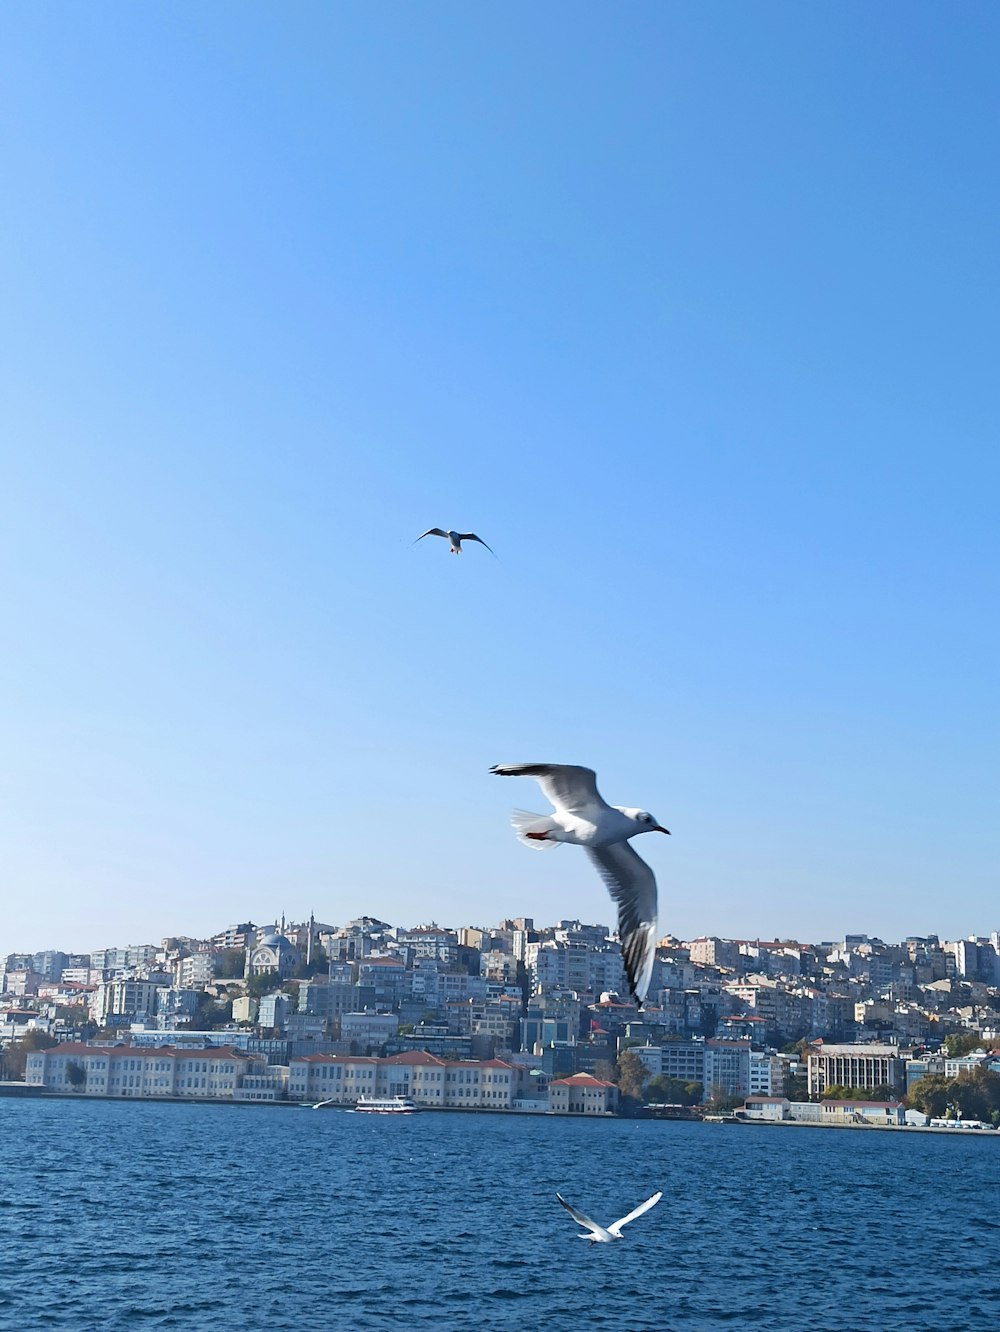 two seagulls flying over a large body of water